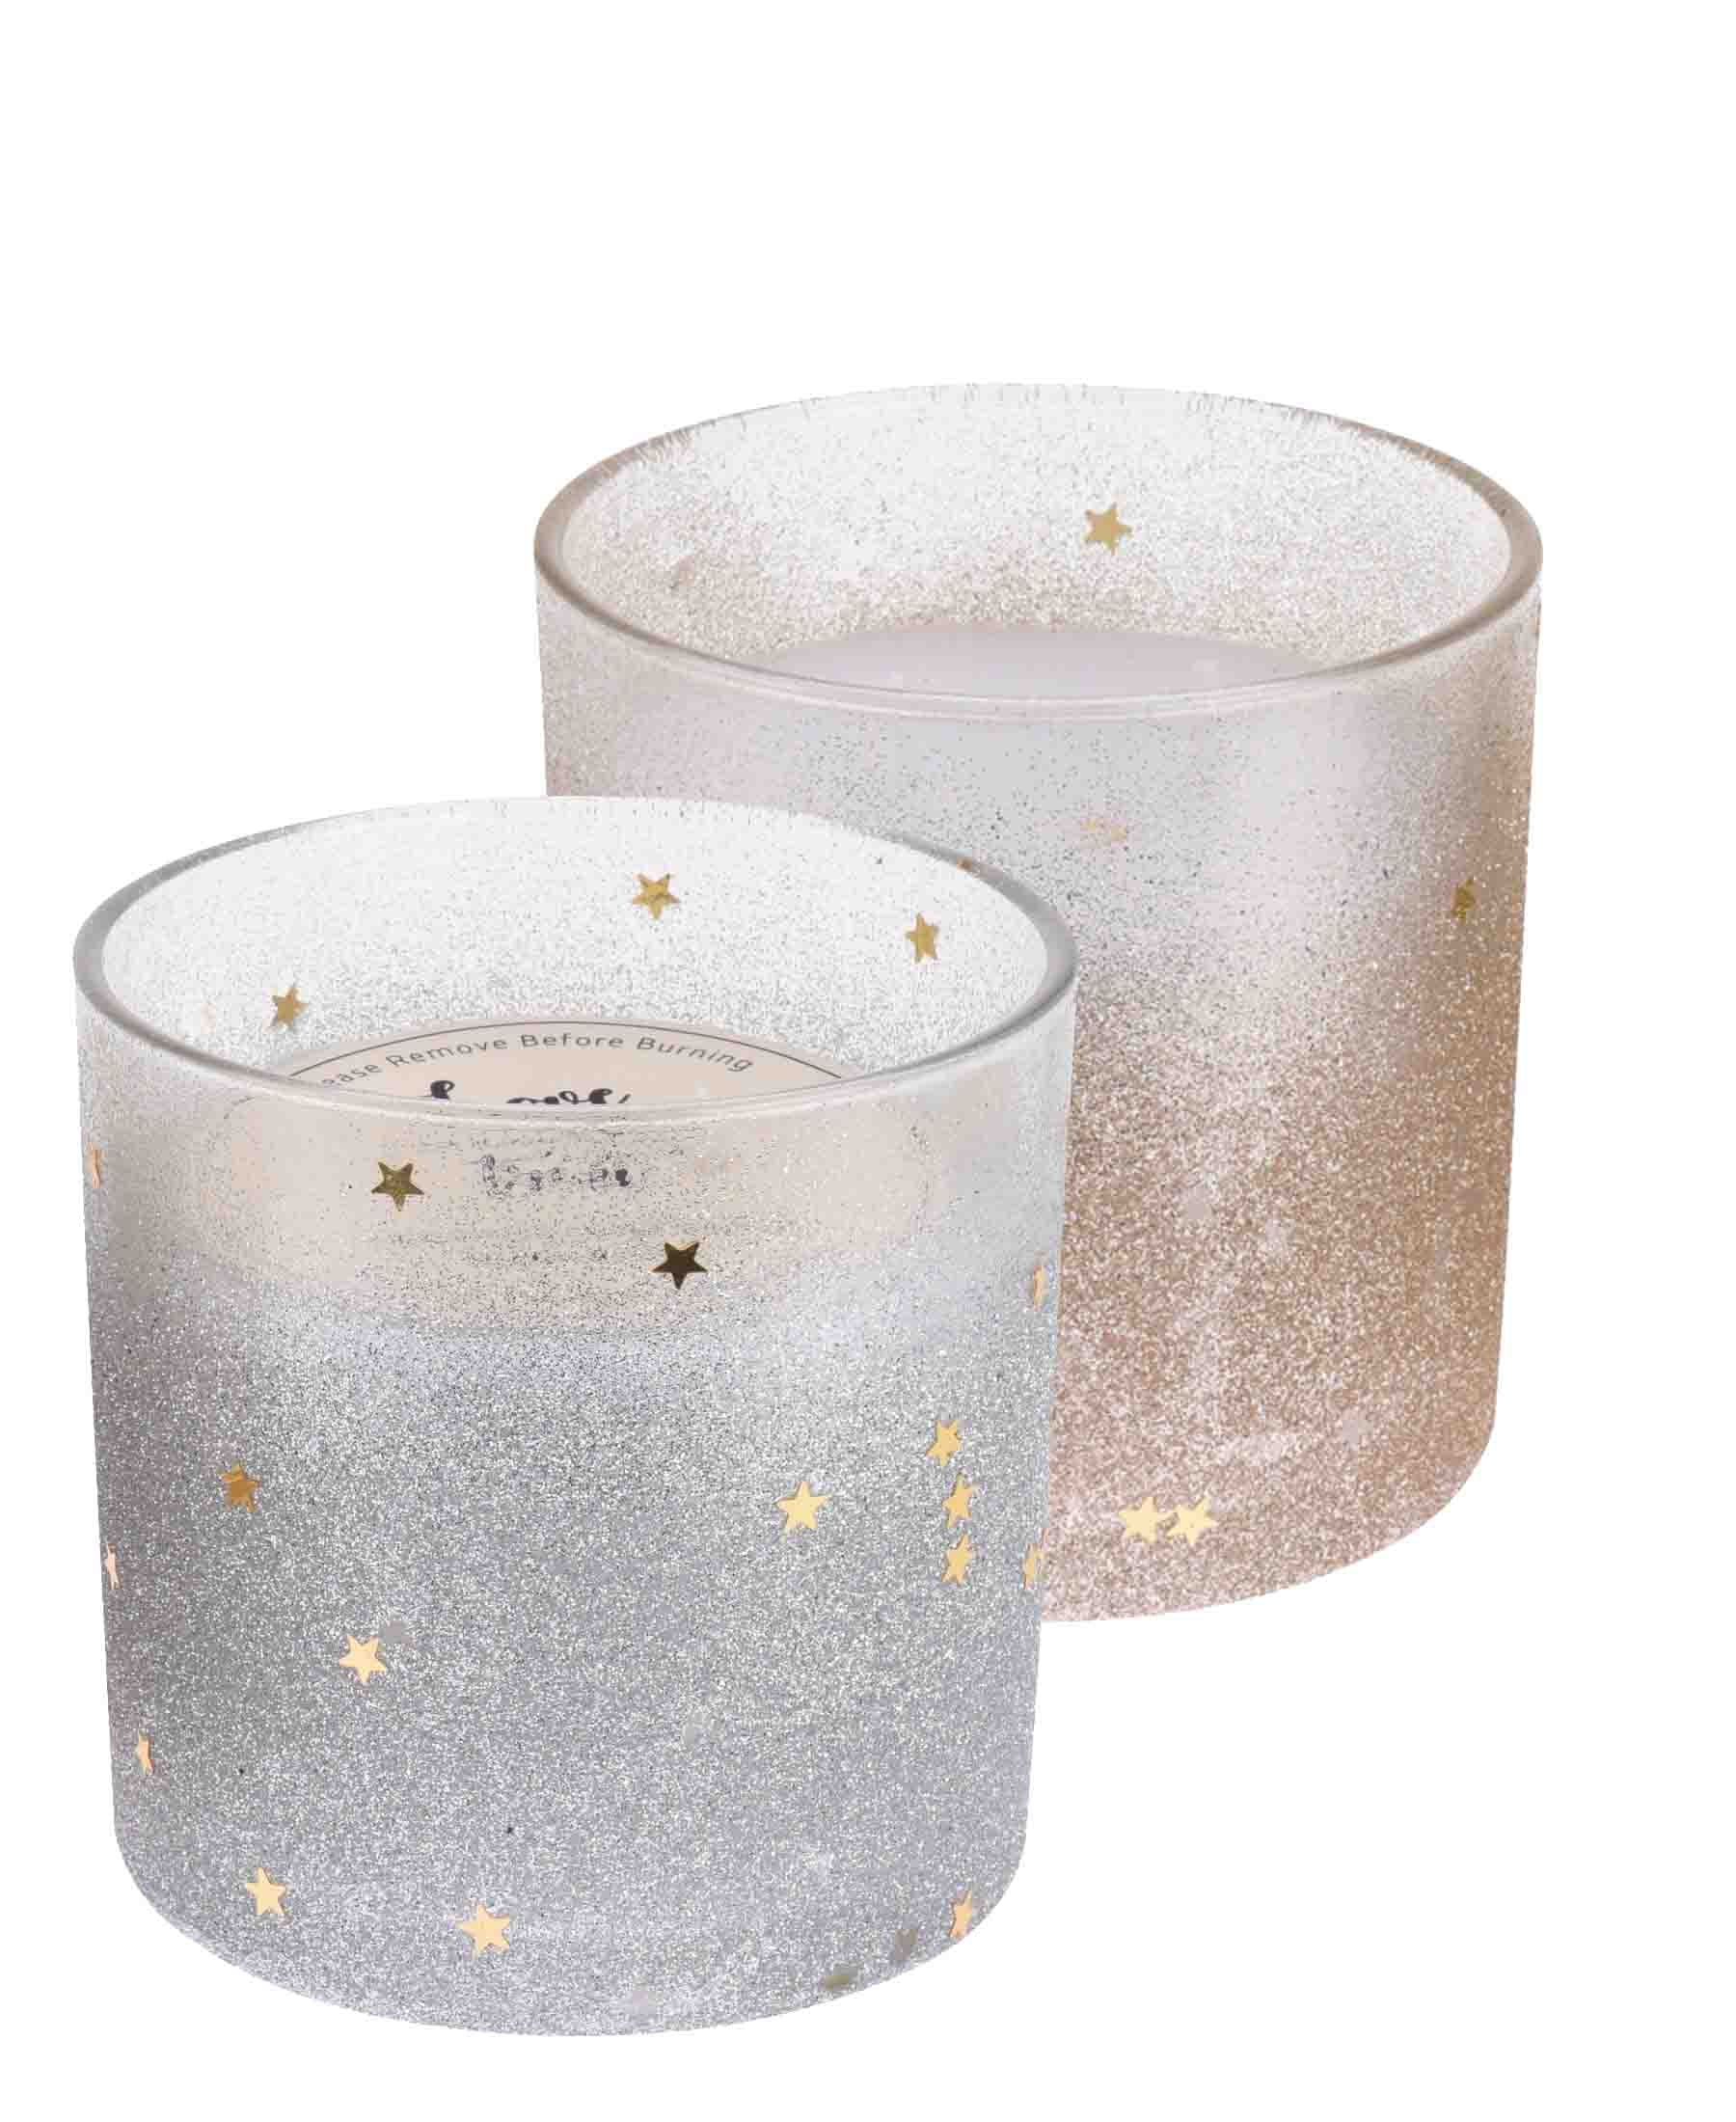 Home & Styling 10cm Christmas Deco Candle - Gold